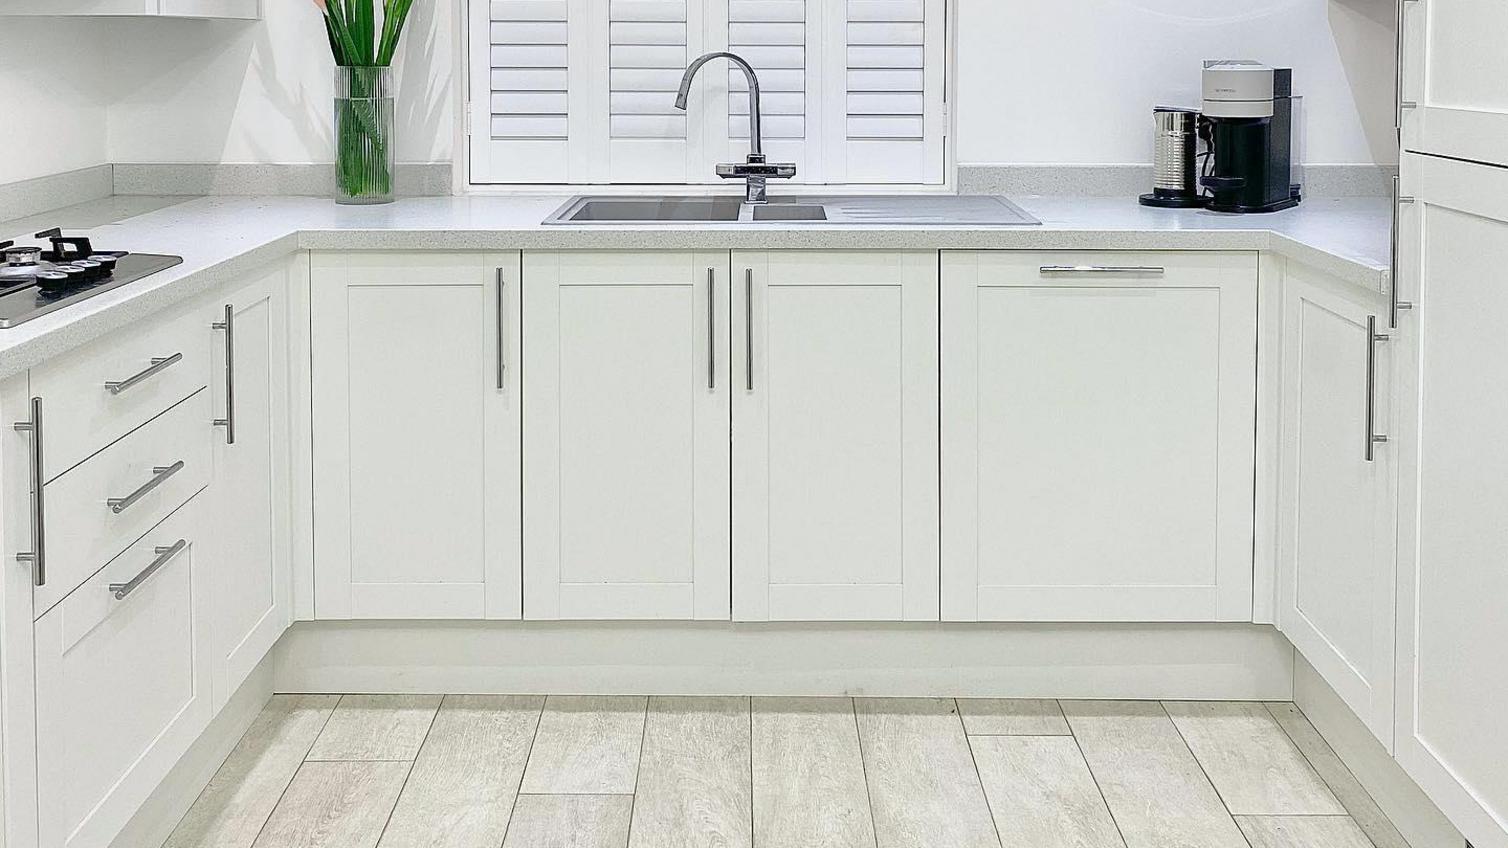 A small shaker kitchen in white, from the Allendale range, with a grey worktop and wood effect flooring.